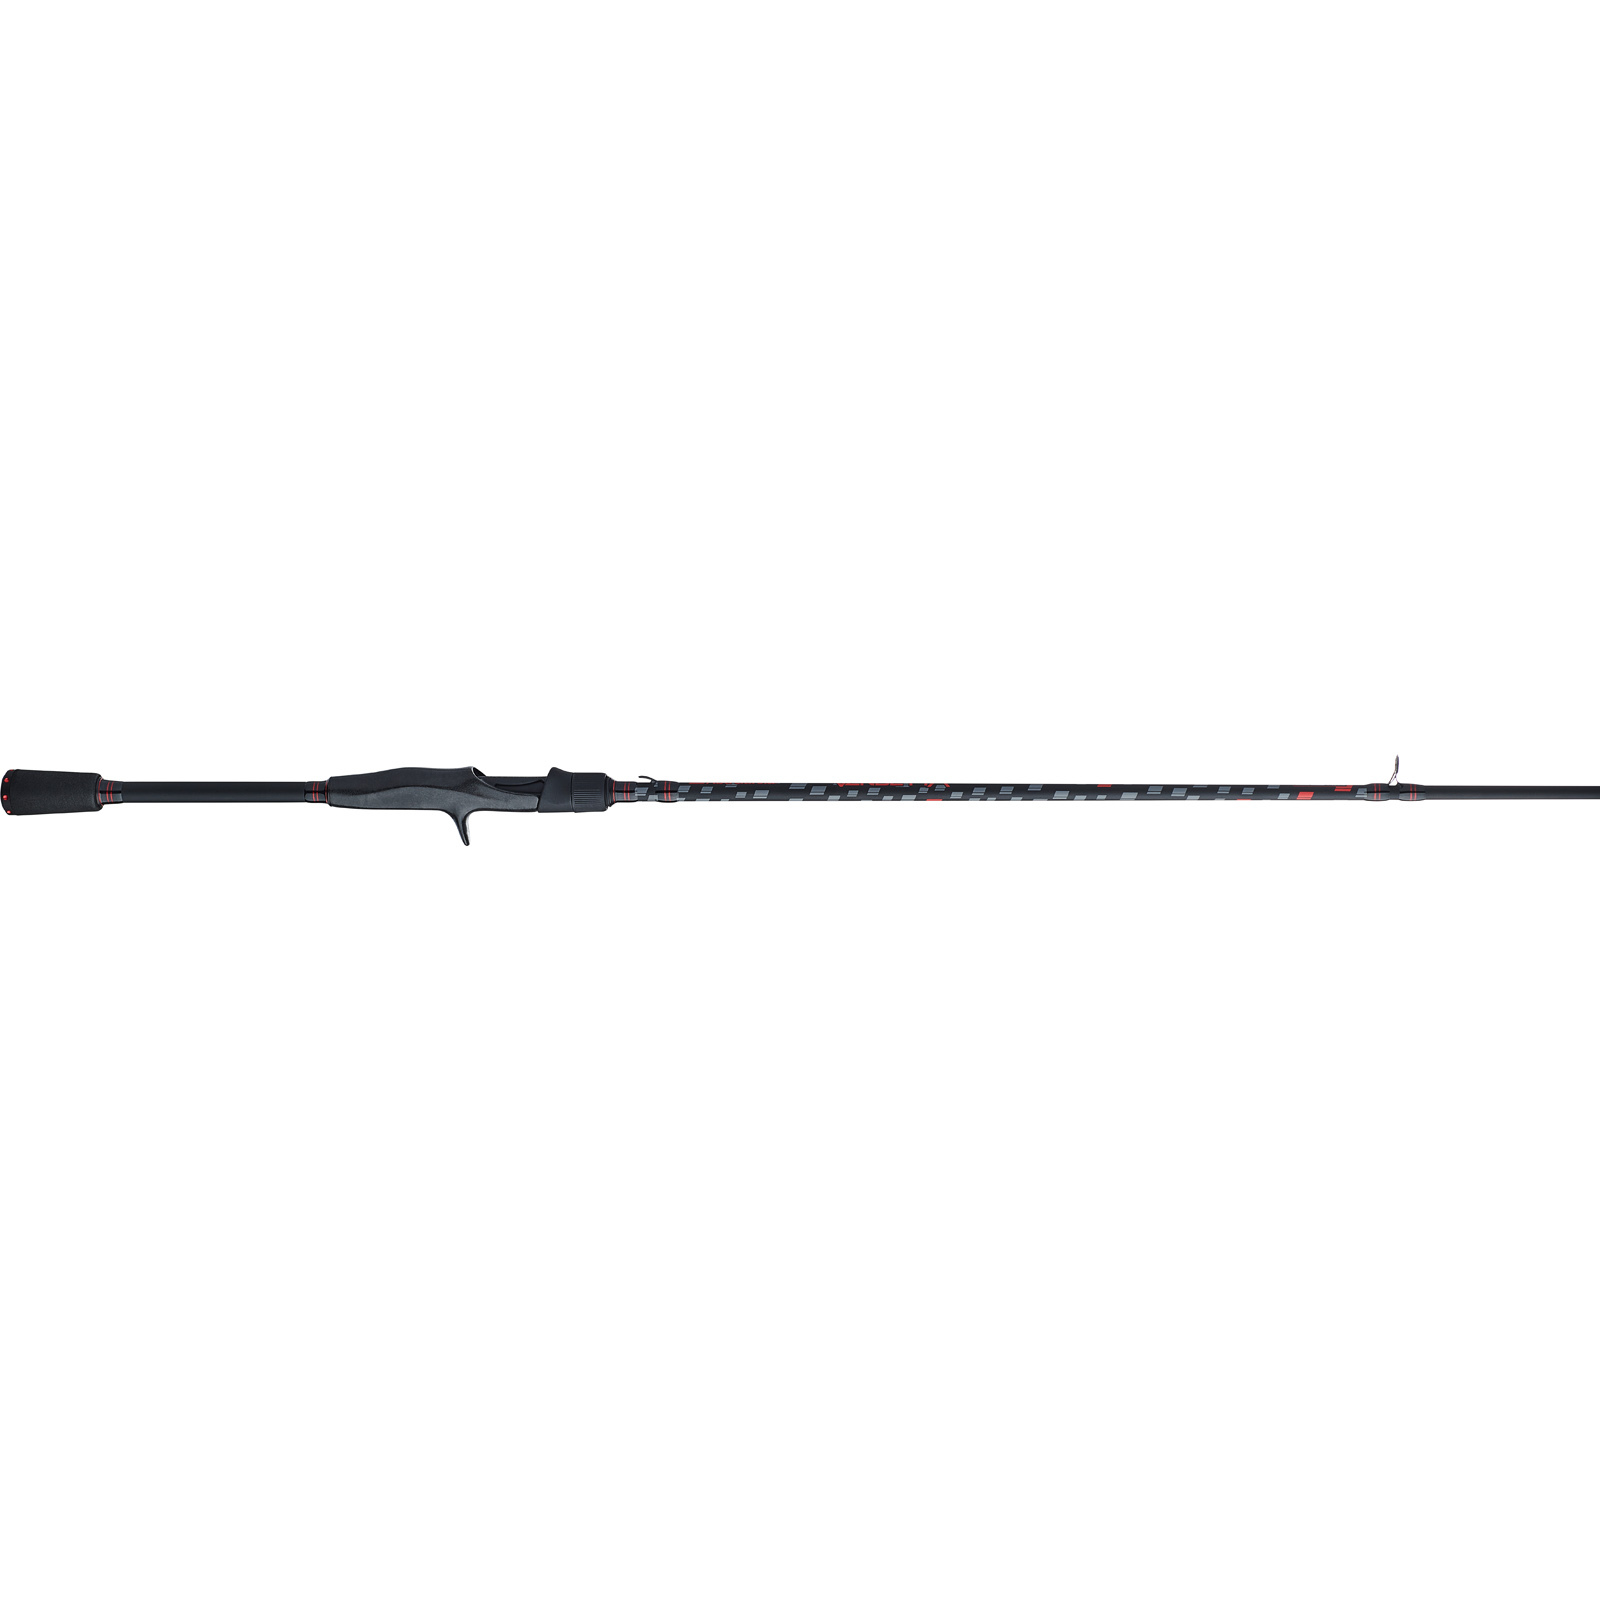 Abu Garcia Vengeance Casting Rod Review - Wired2Fish